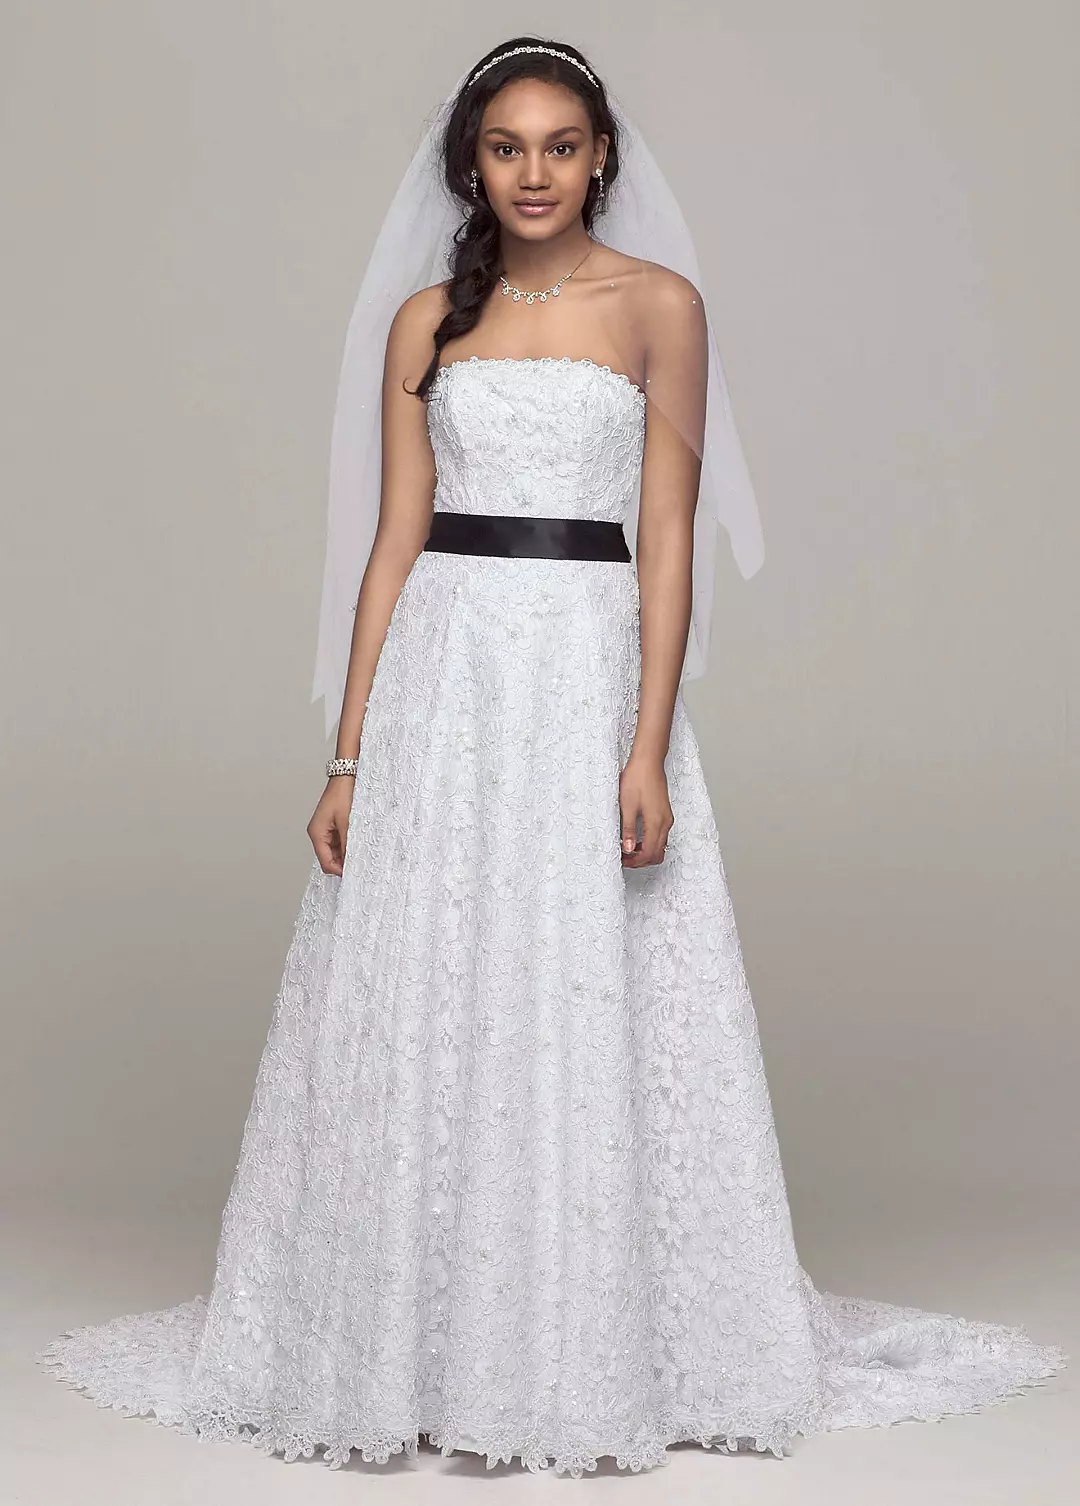  A-line All Over Beaded Corded Lace Wedding Dress Image